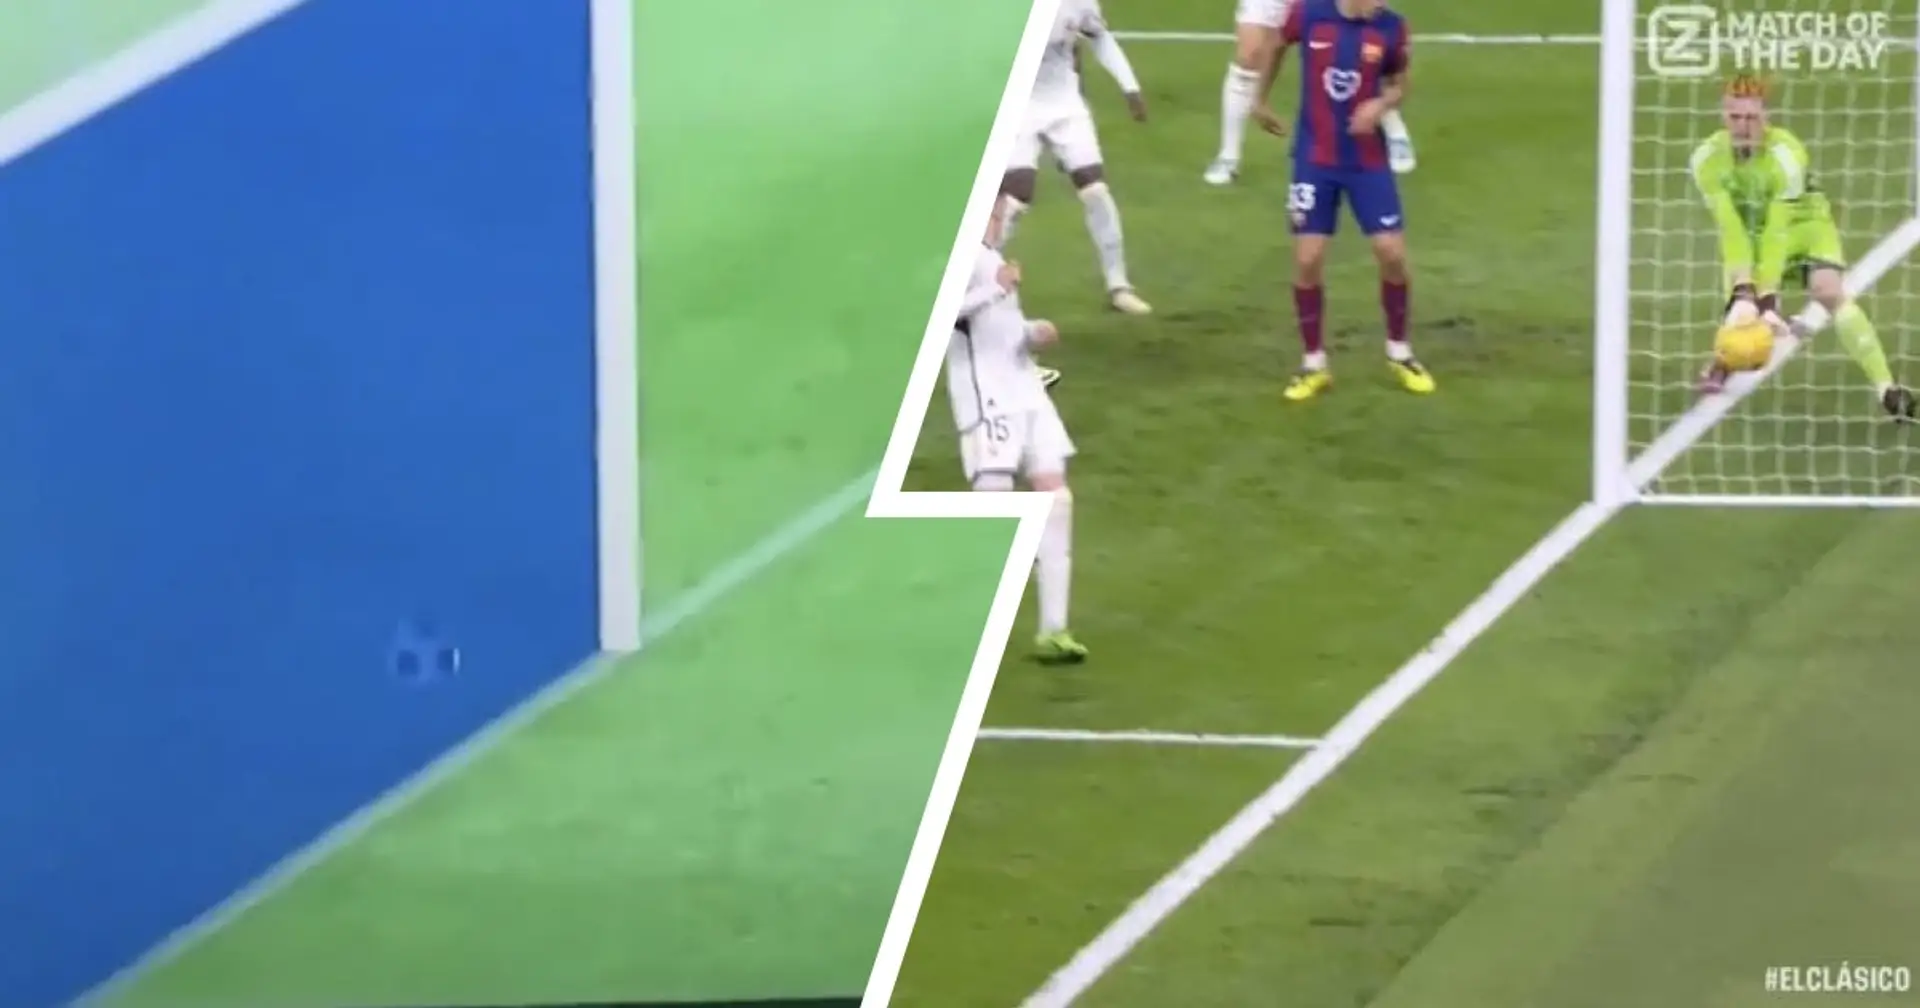 Explained: Why La Liga doesn't have goal-line technology as Barca are robbed in El Clasico